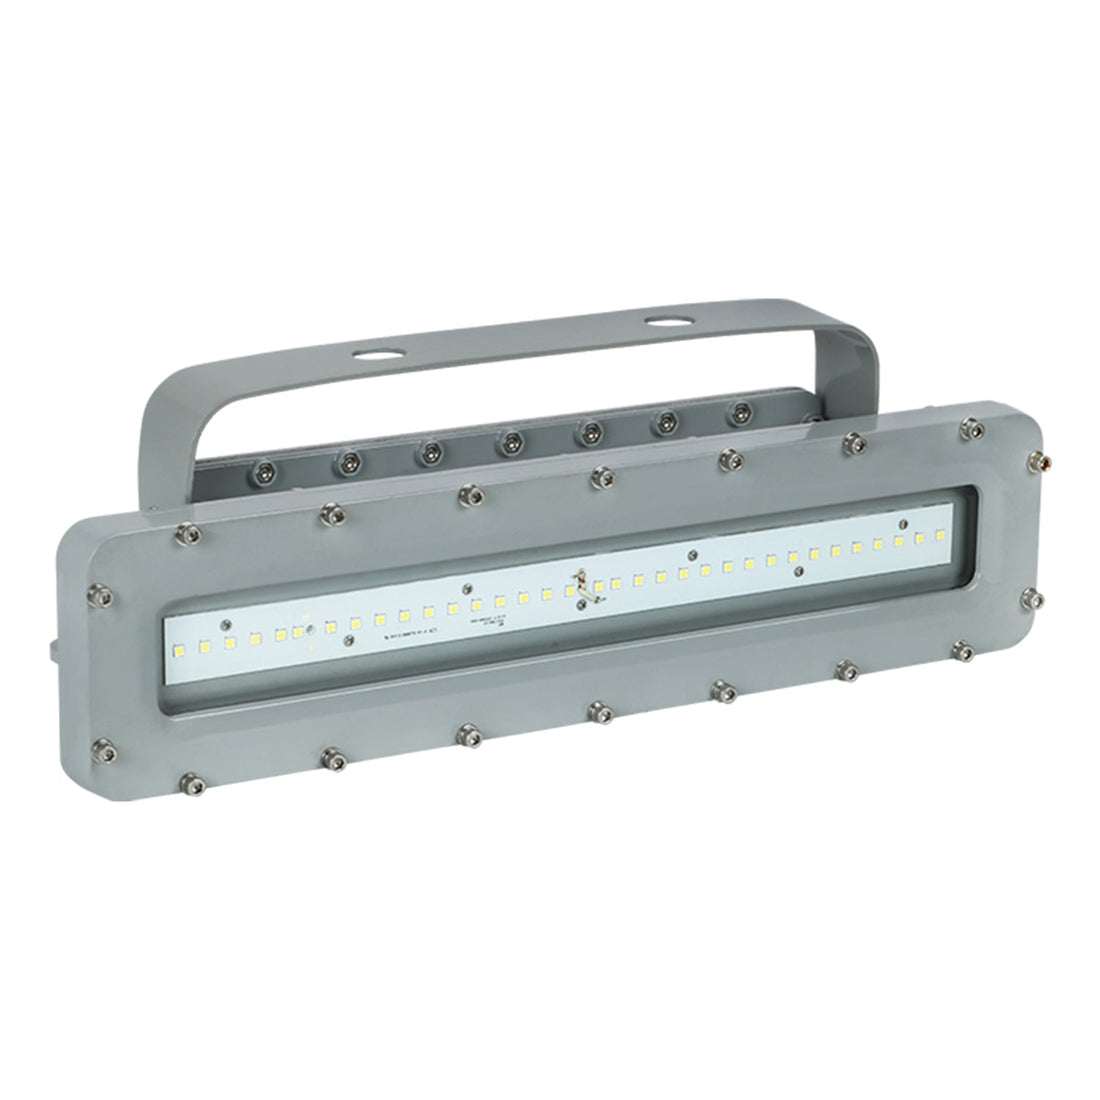 I Series 60W Non-Dimmable LED Explosion Proof Linear Light: High-Performance Lighting Solution for Hazardous Locations with 8400LM and IP66 Protection, Ideal for Industrial Environments